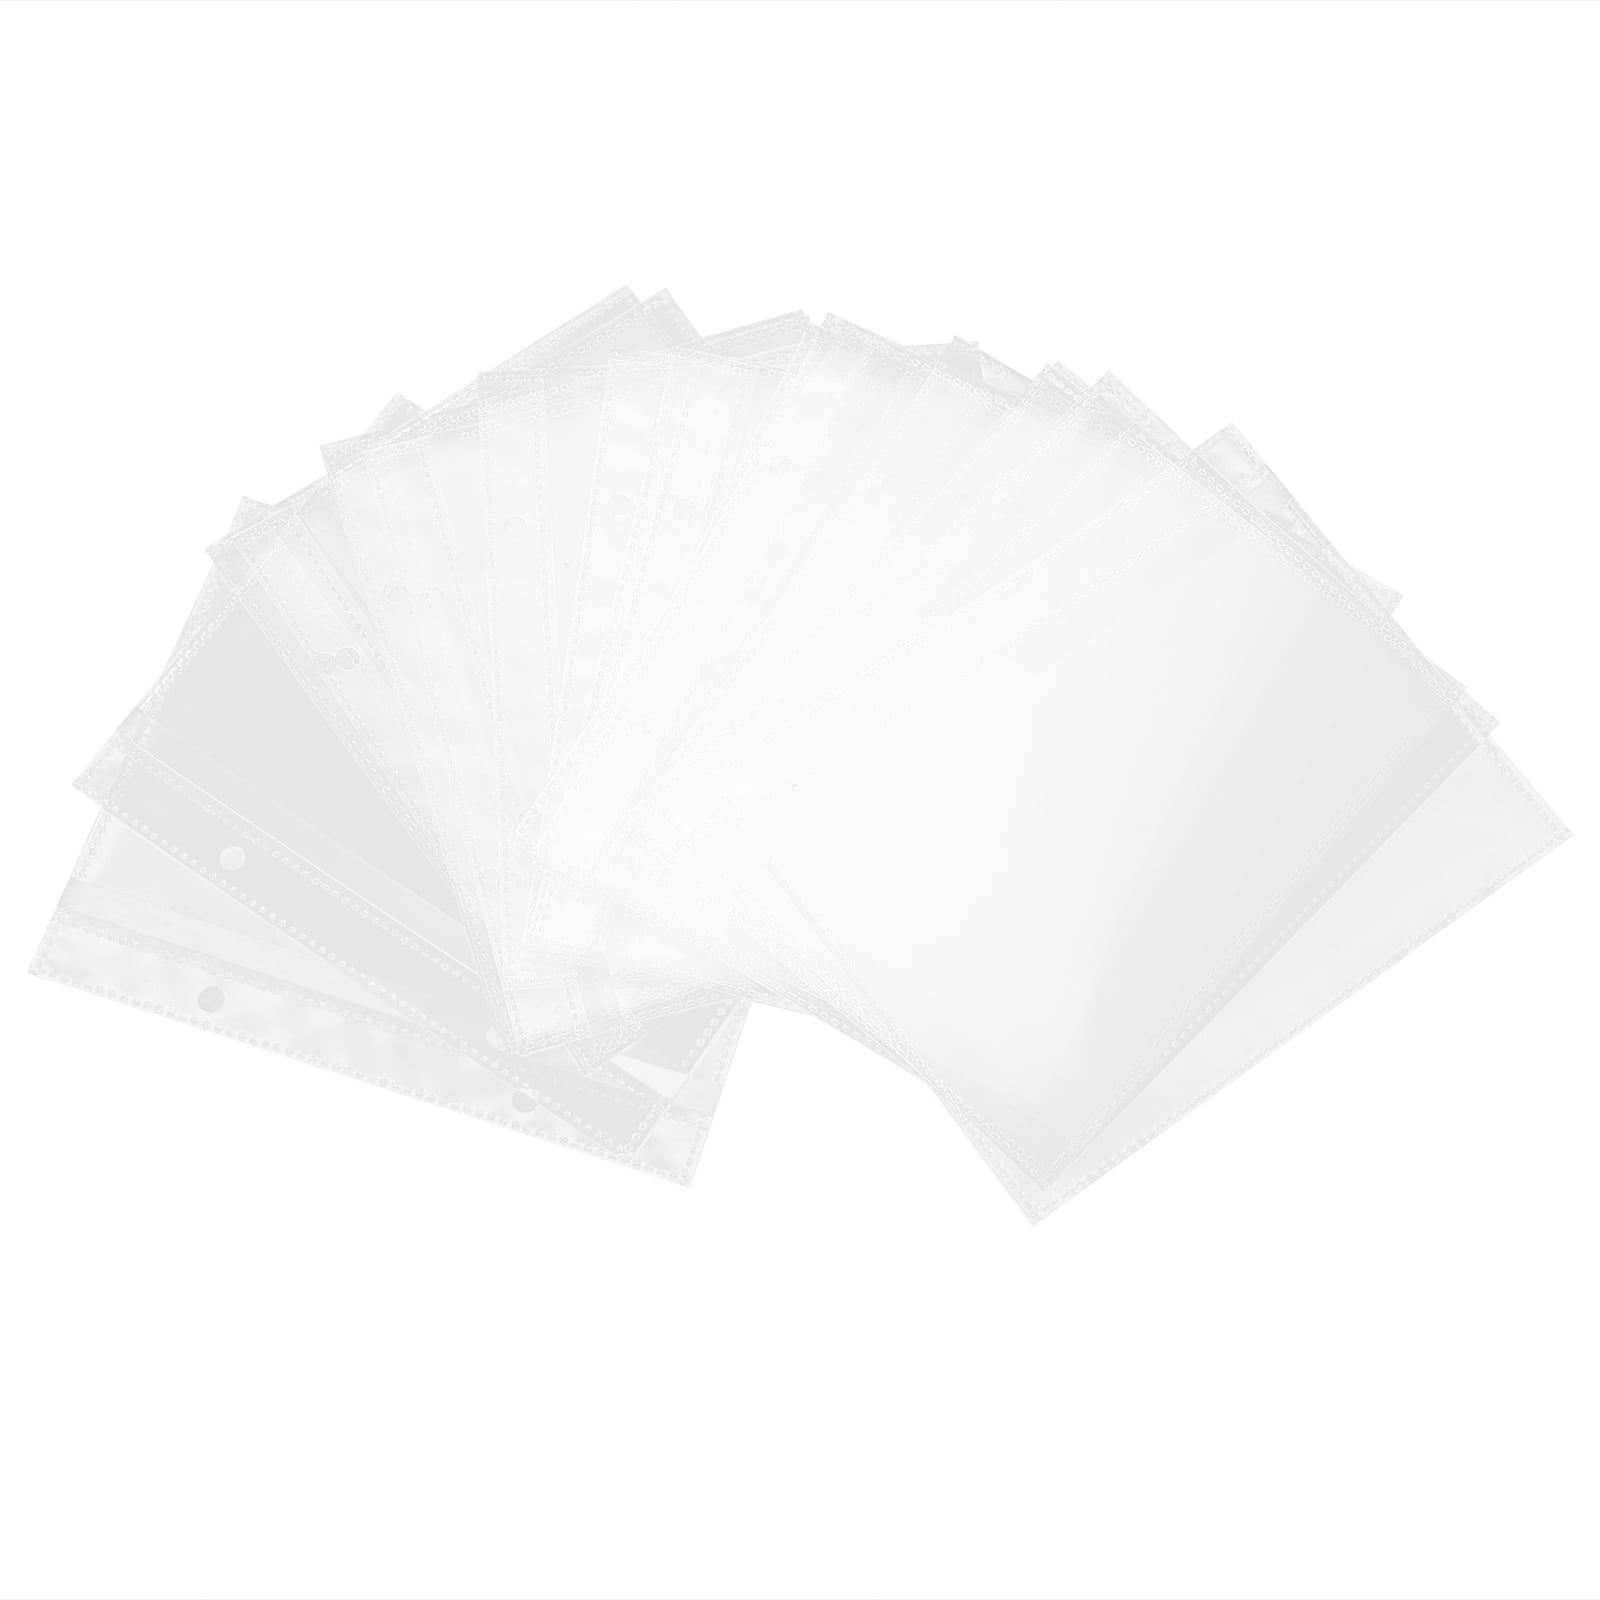  25 Pieces 8.5x 11 Rigid Print Protectors Clear Rigid  Toploader Clear Sheet Protectors Plastic Paper Protector Sheets Photo  Plastic Sleeves Hard Plastic Document Holder Photo Card Holder : Office  Products